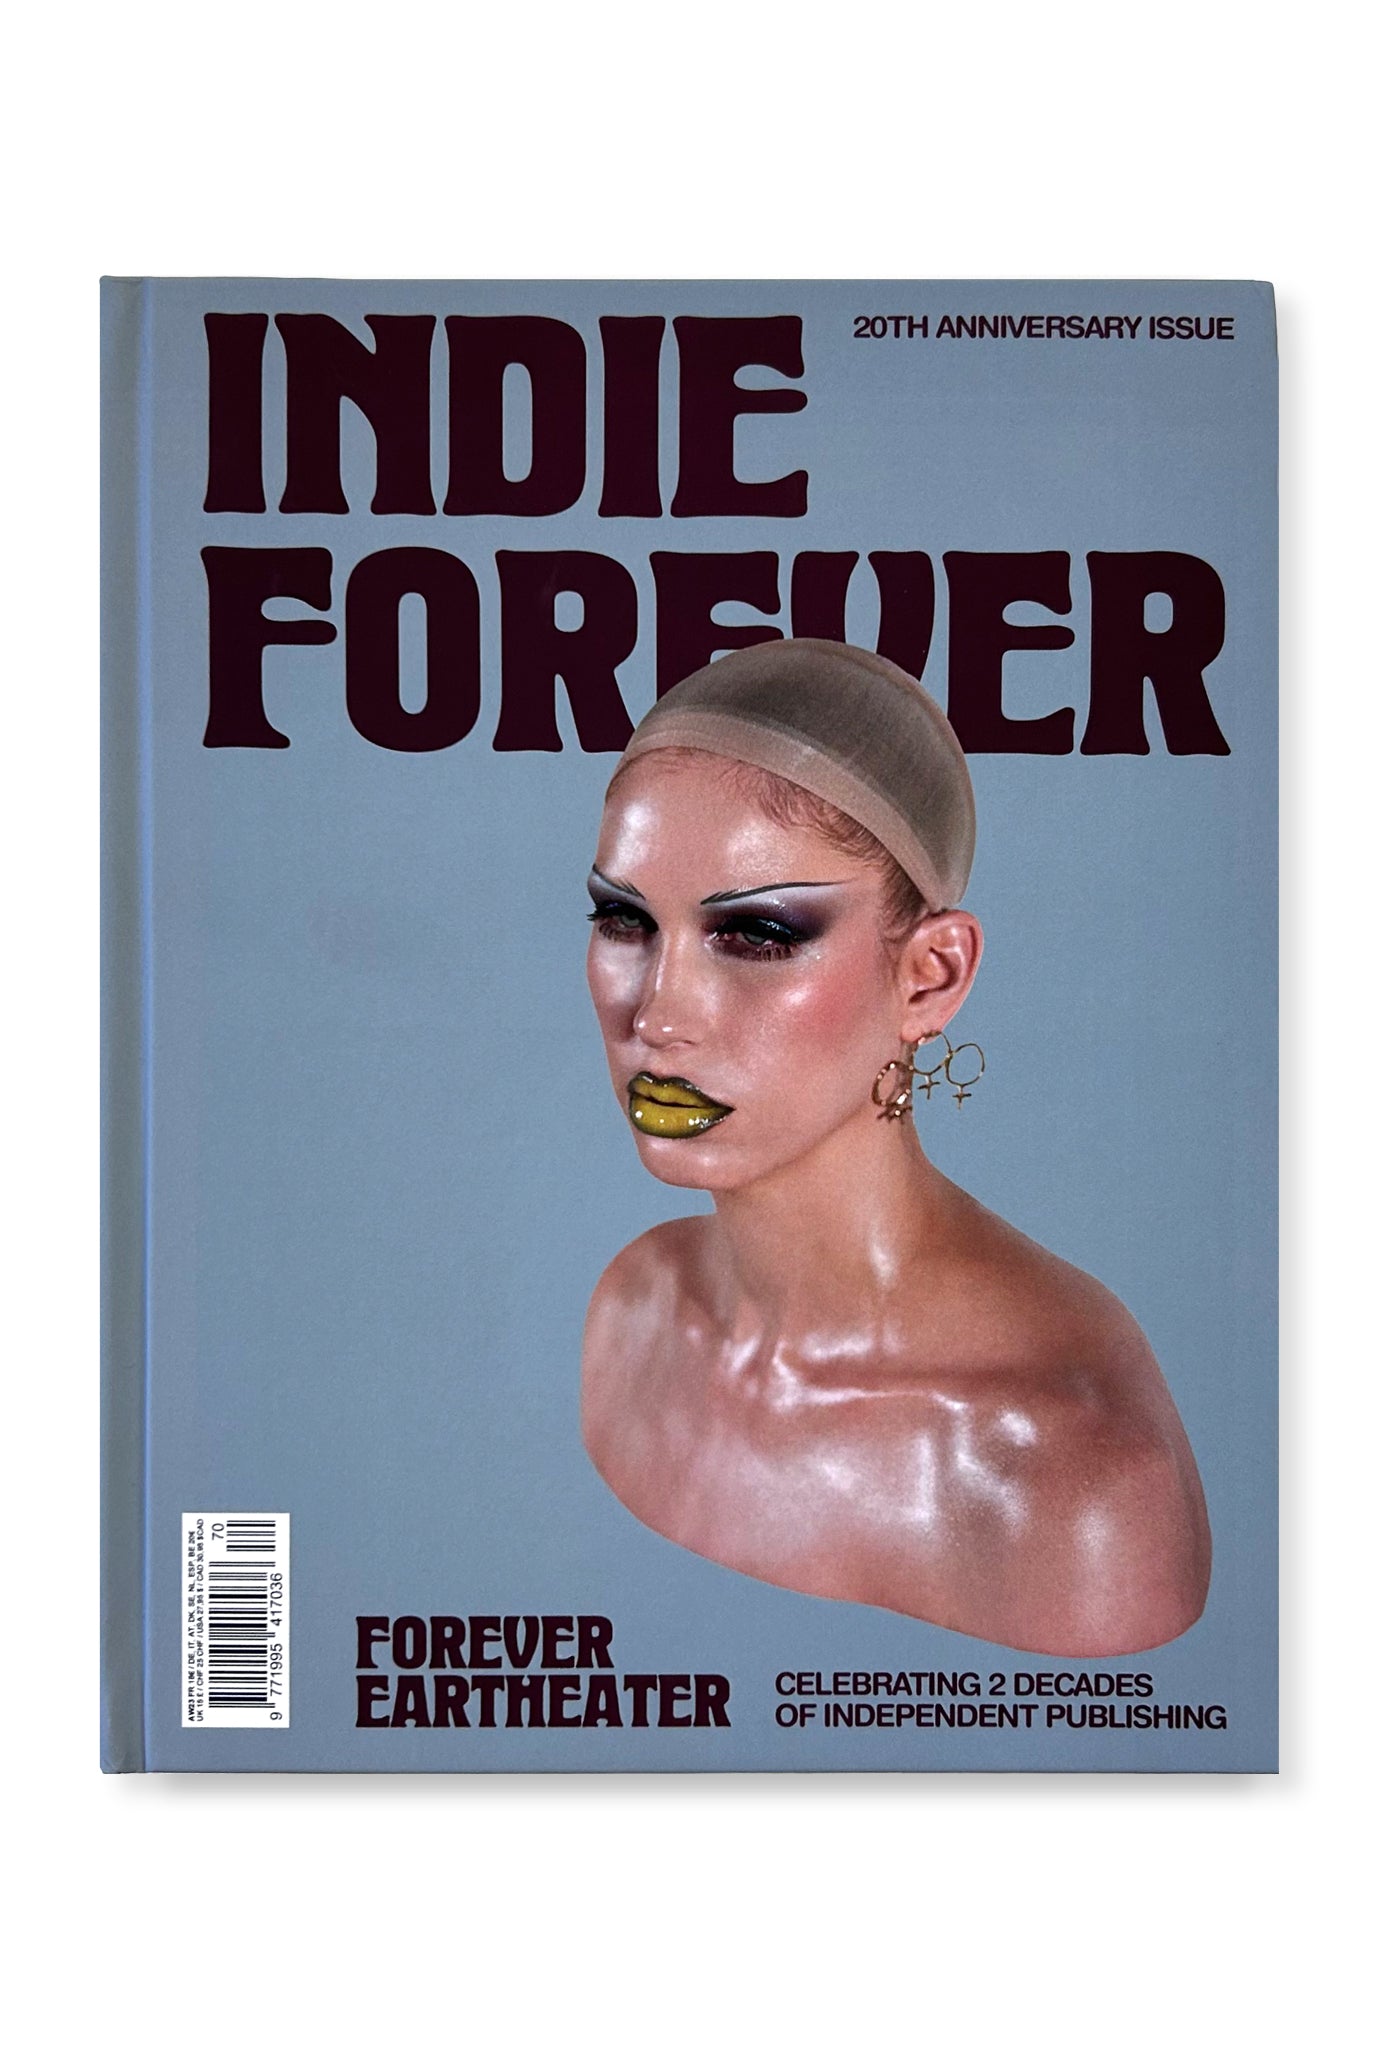 Indie, Issue 70 - 20th Anniversary Issue